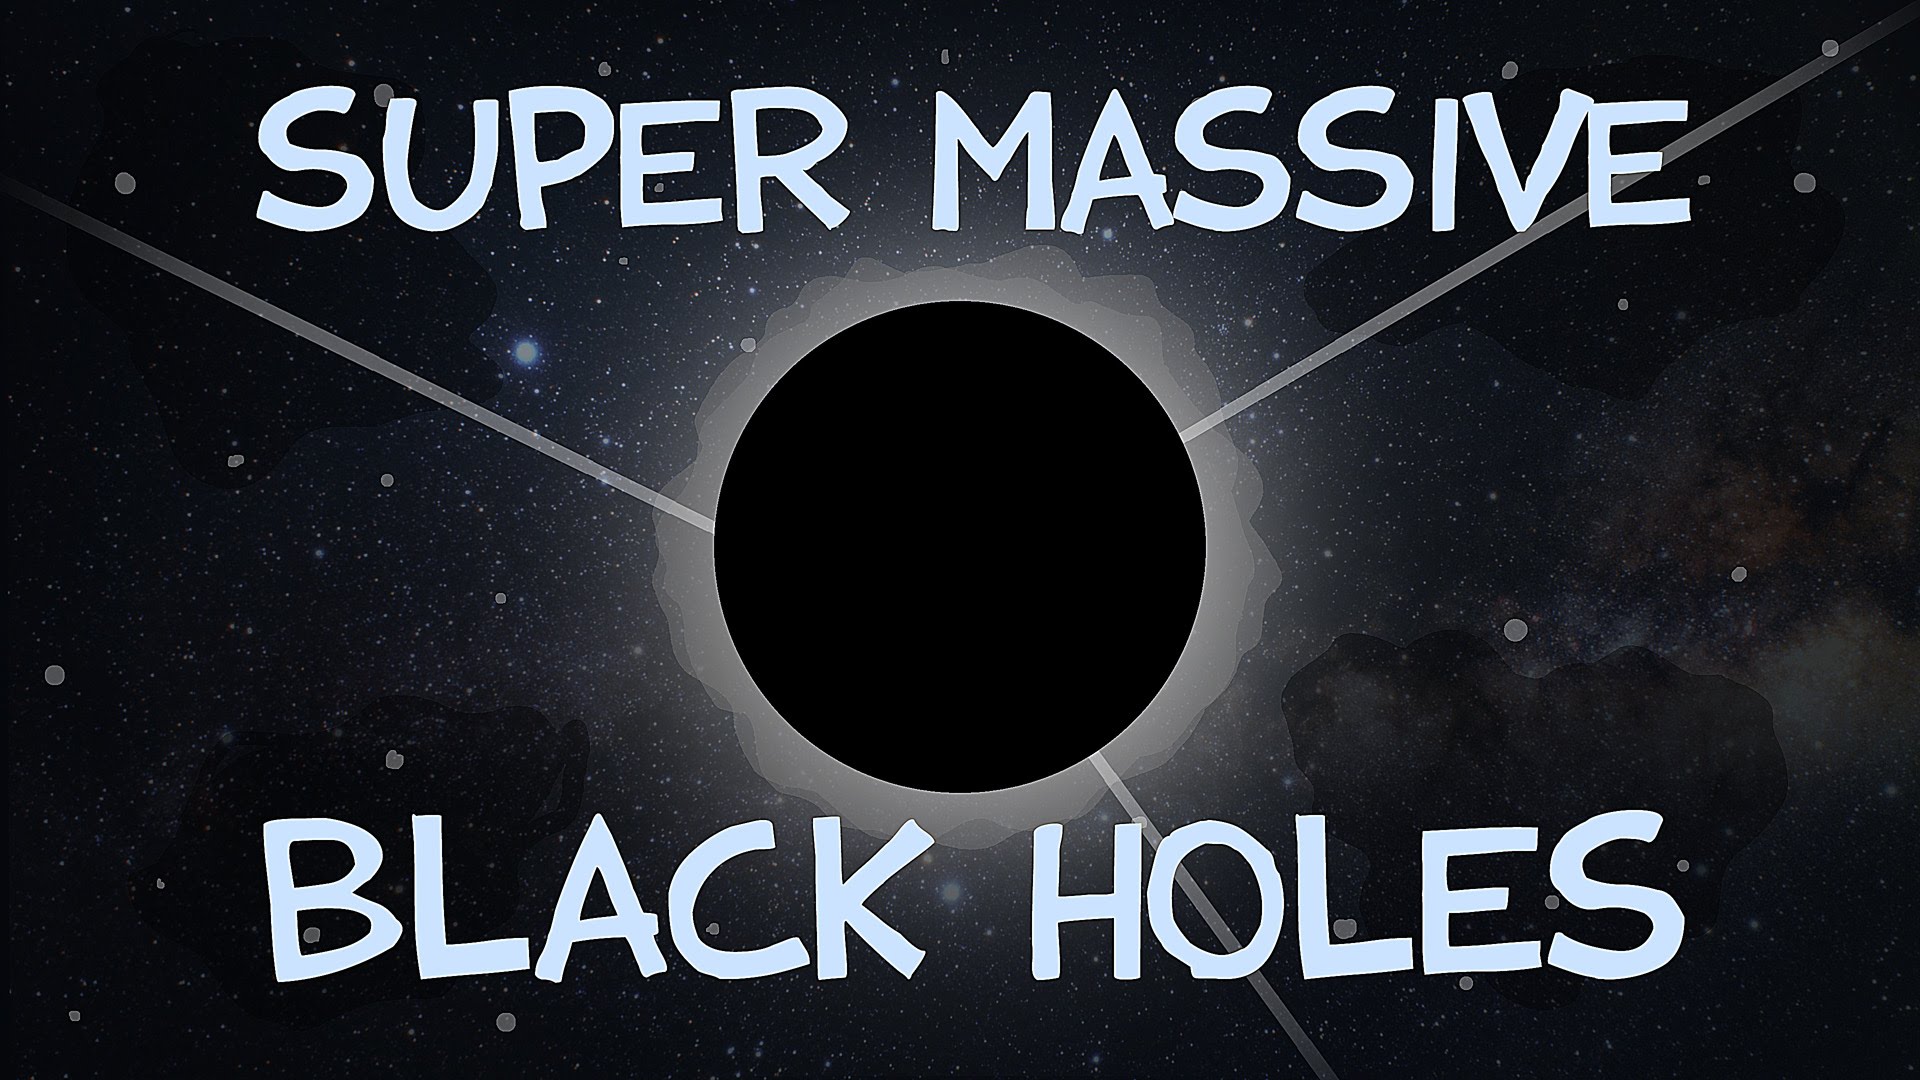 Where Supermassive Black Holes Come From [Video]